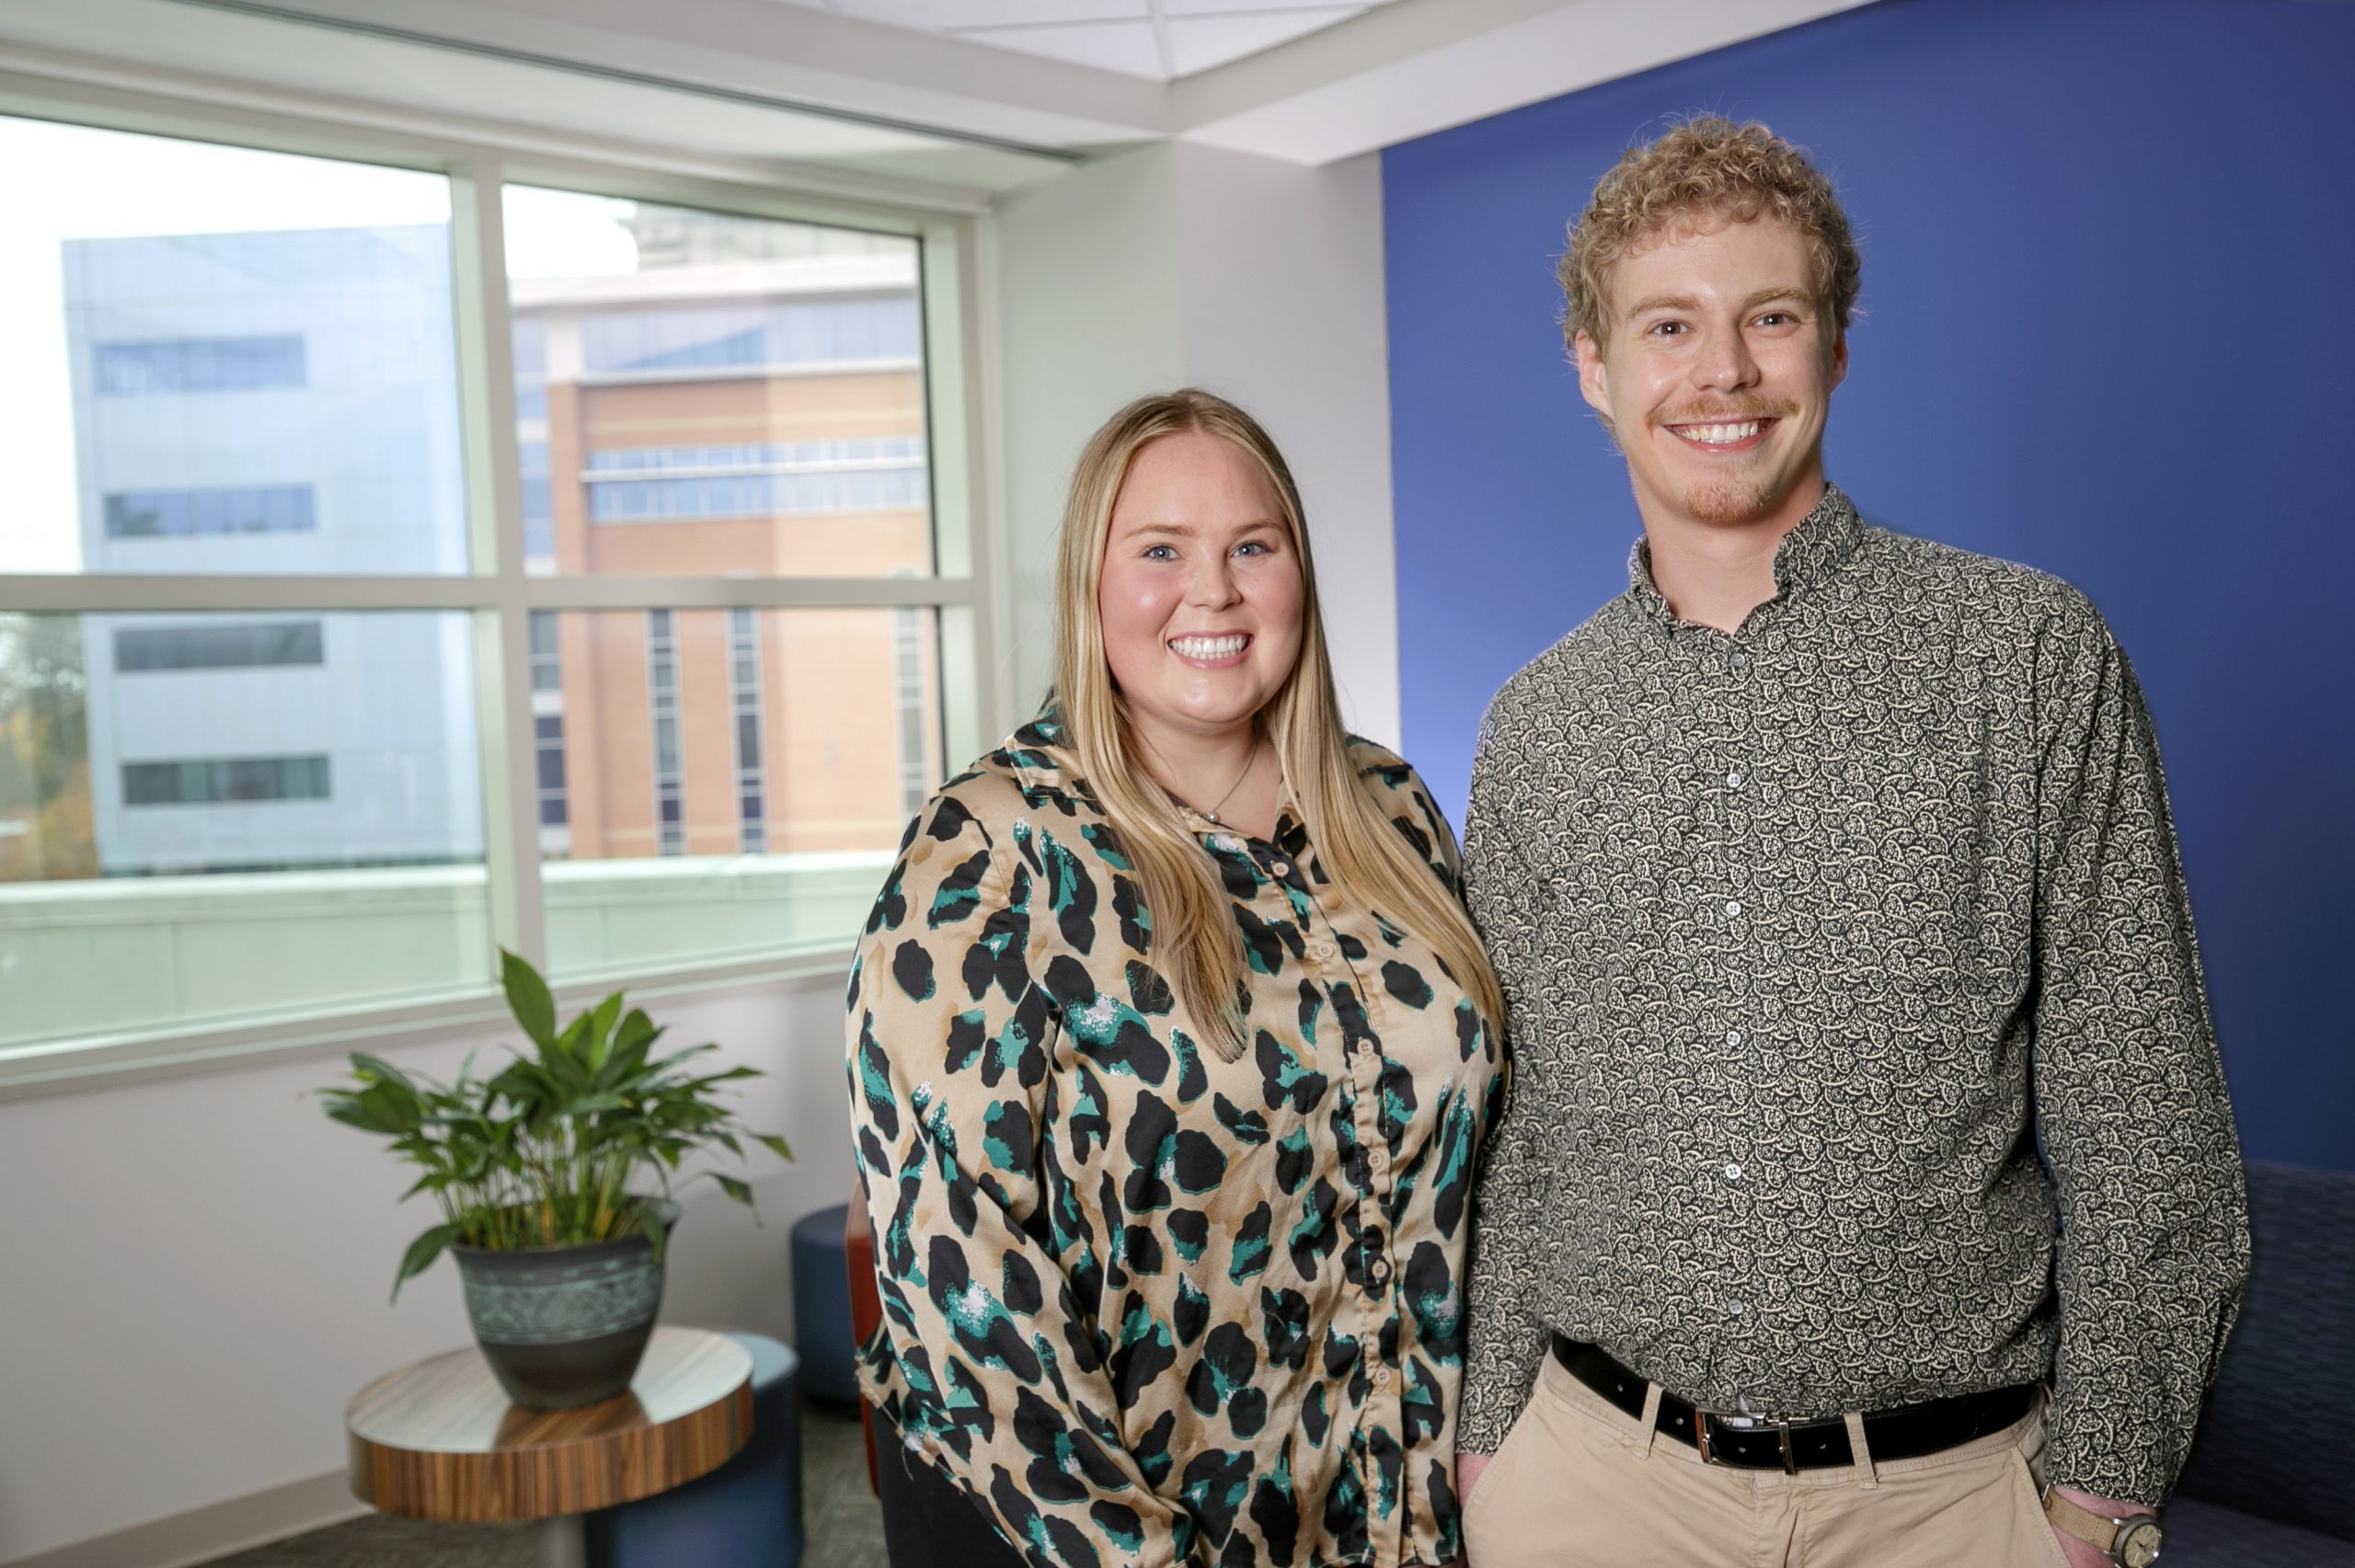 Elizabeth, and Josiah are graduate students who work on the Startup Team at UA Little Rock's Arkansas Small Business and Technology Department Center.